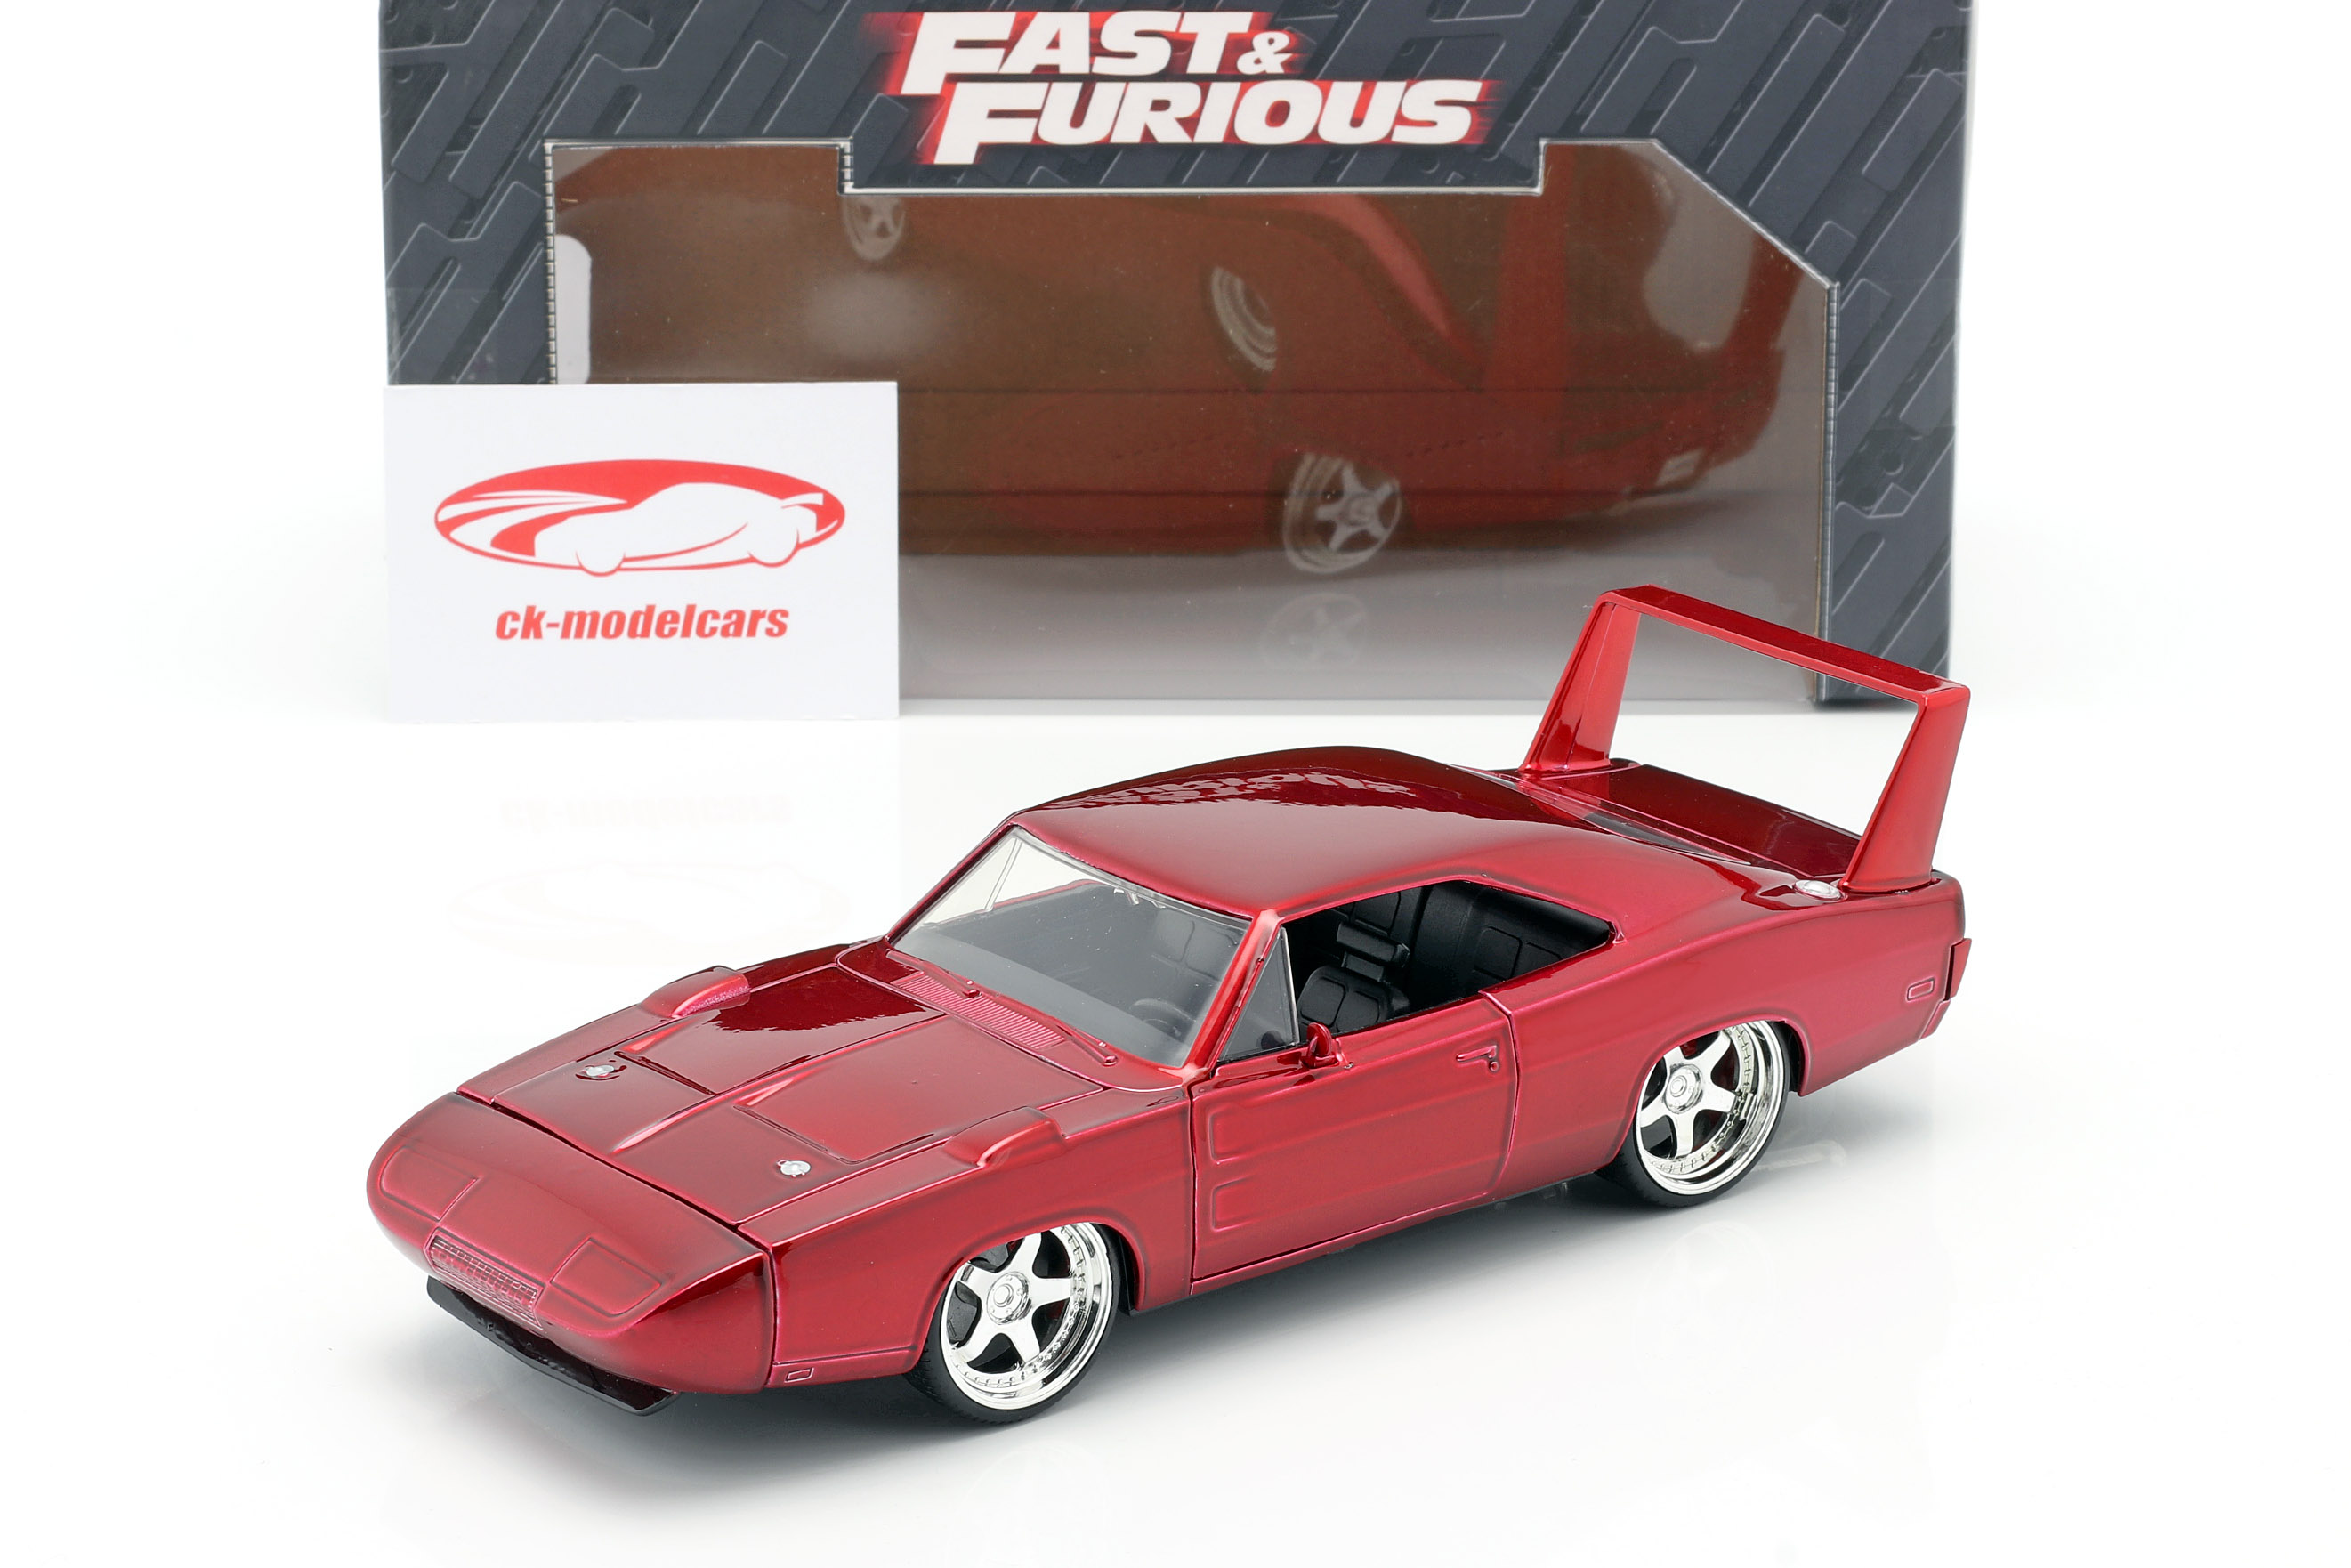 Dodge Charger Daytona Anno 1969 Fast and Furious 6 2013 rosso 1:24 Jada Toys